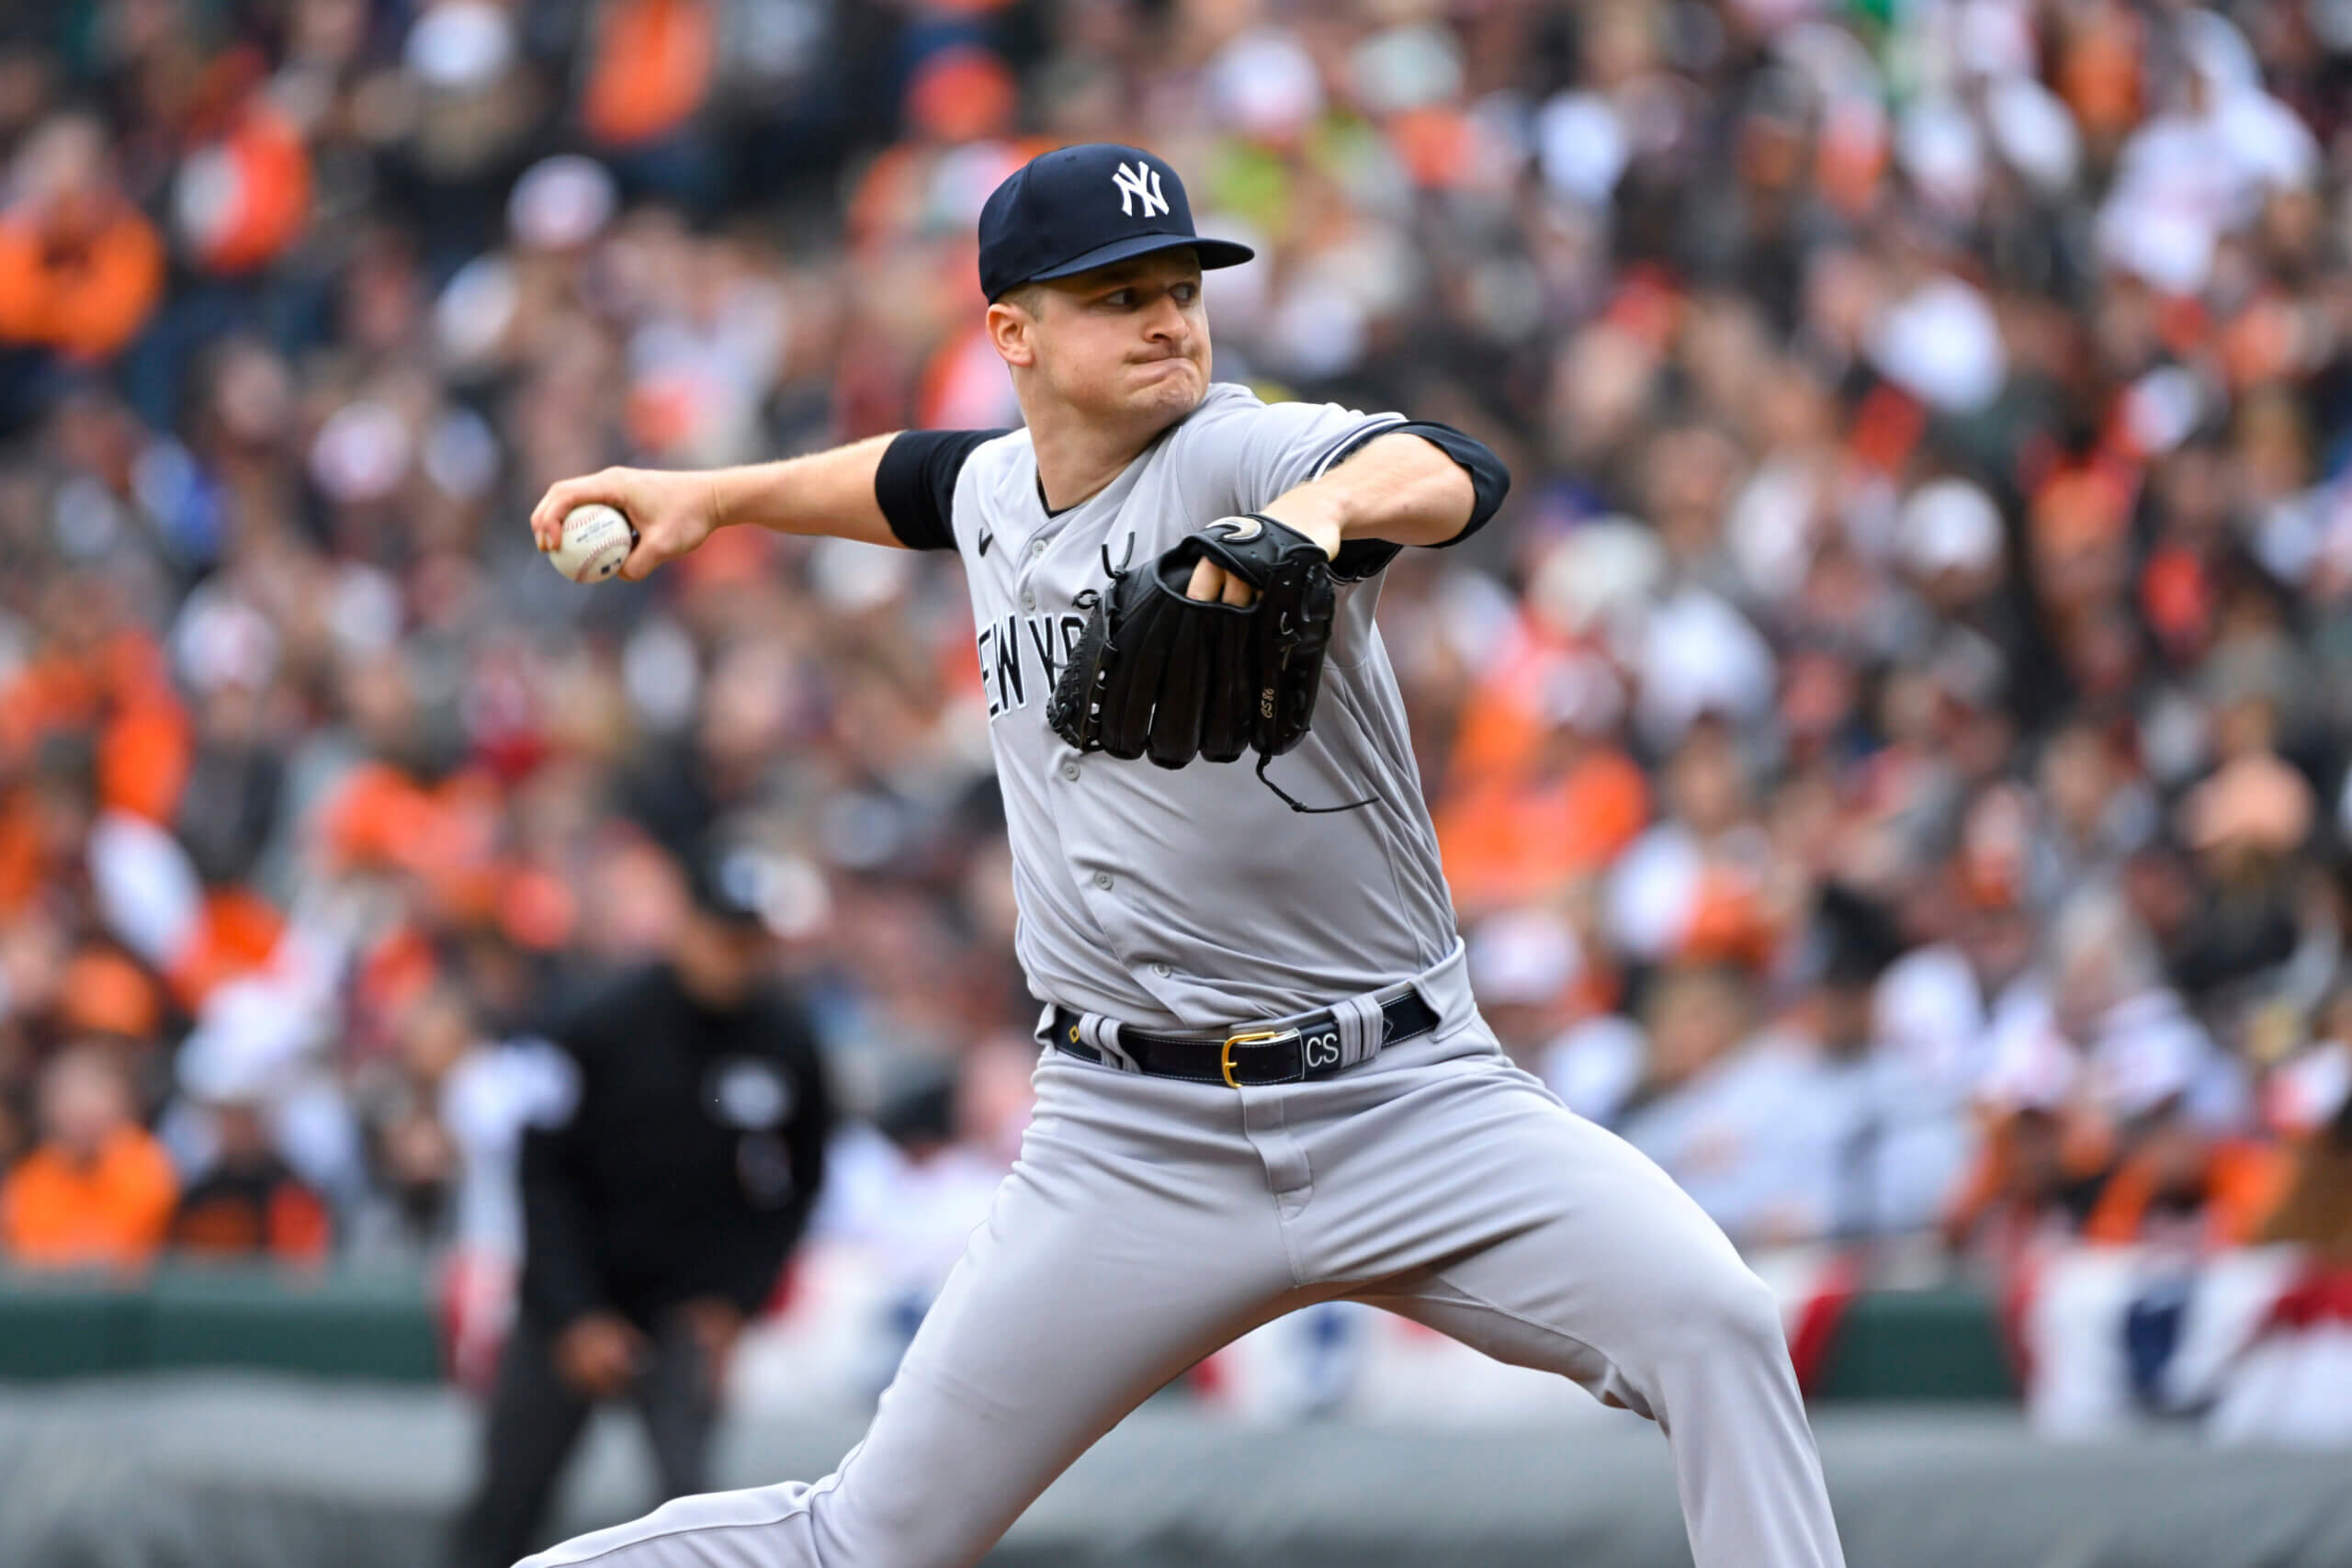 Key Yankees reliever could lose bullpen spot if struggles continue